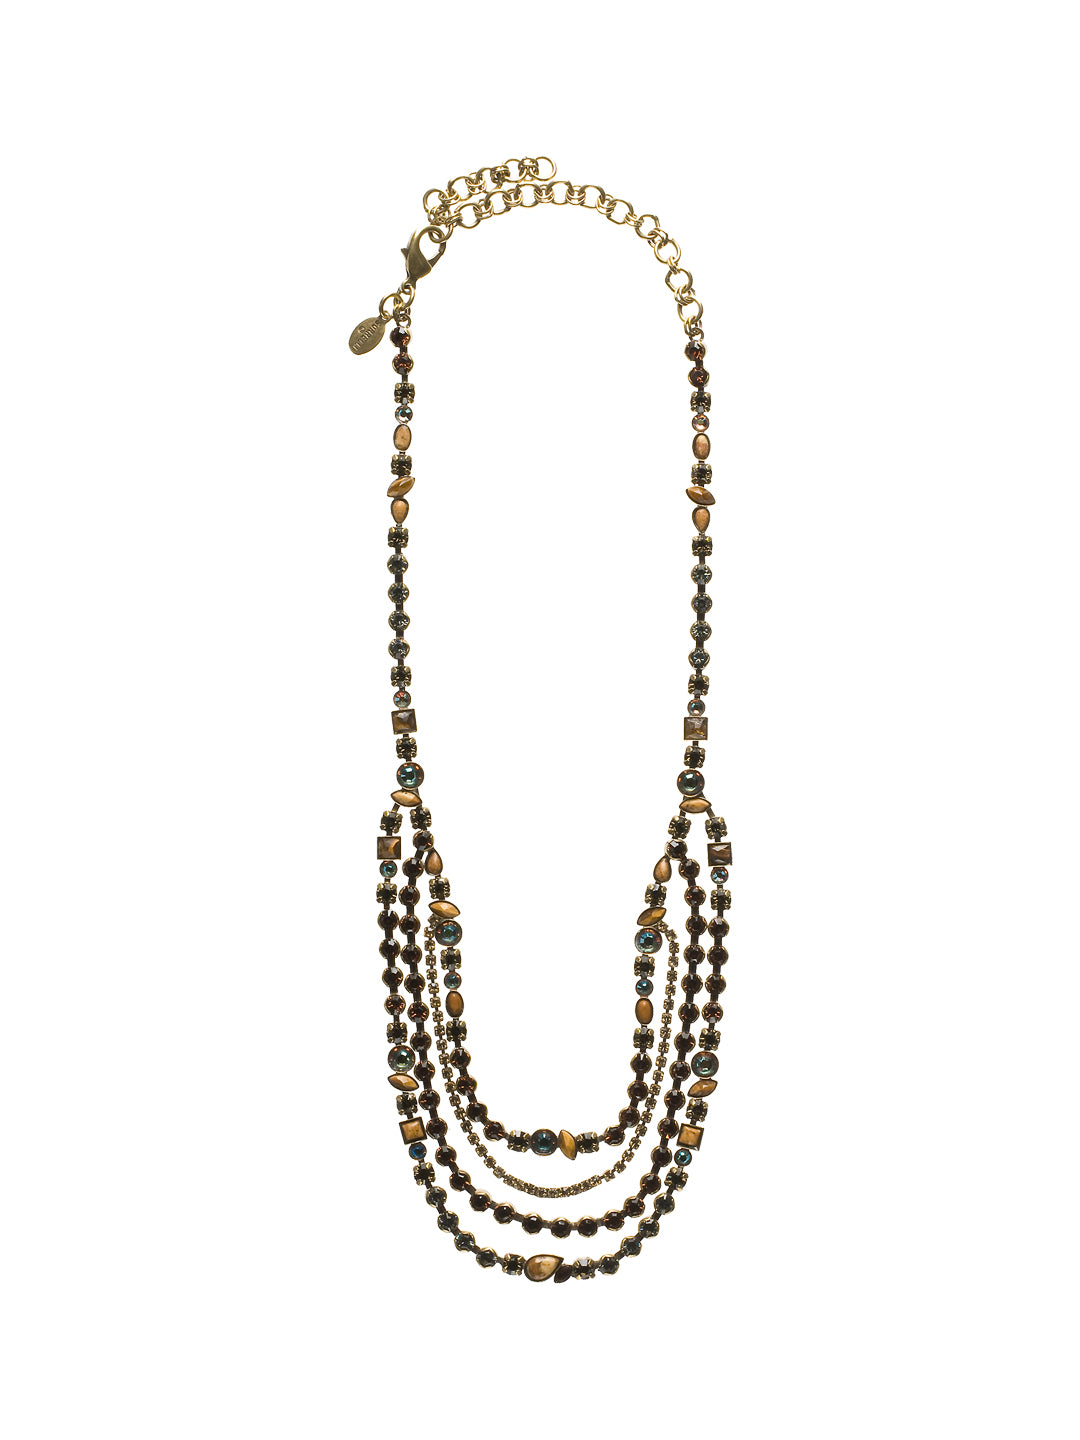 Odette Bib Necklace - NBJ42AGCN - A classic Sorrelli style to make a statement or wear everyday. From Sorrelli's City Neutral collection in our Antique Gold-tone finish.